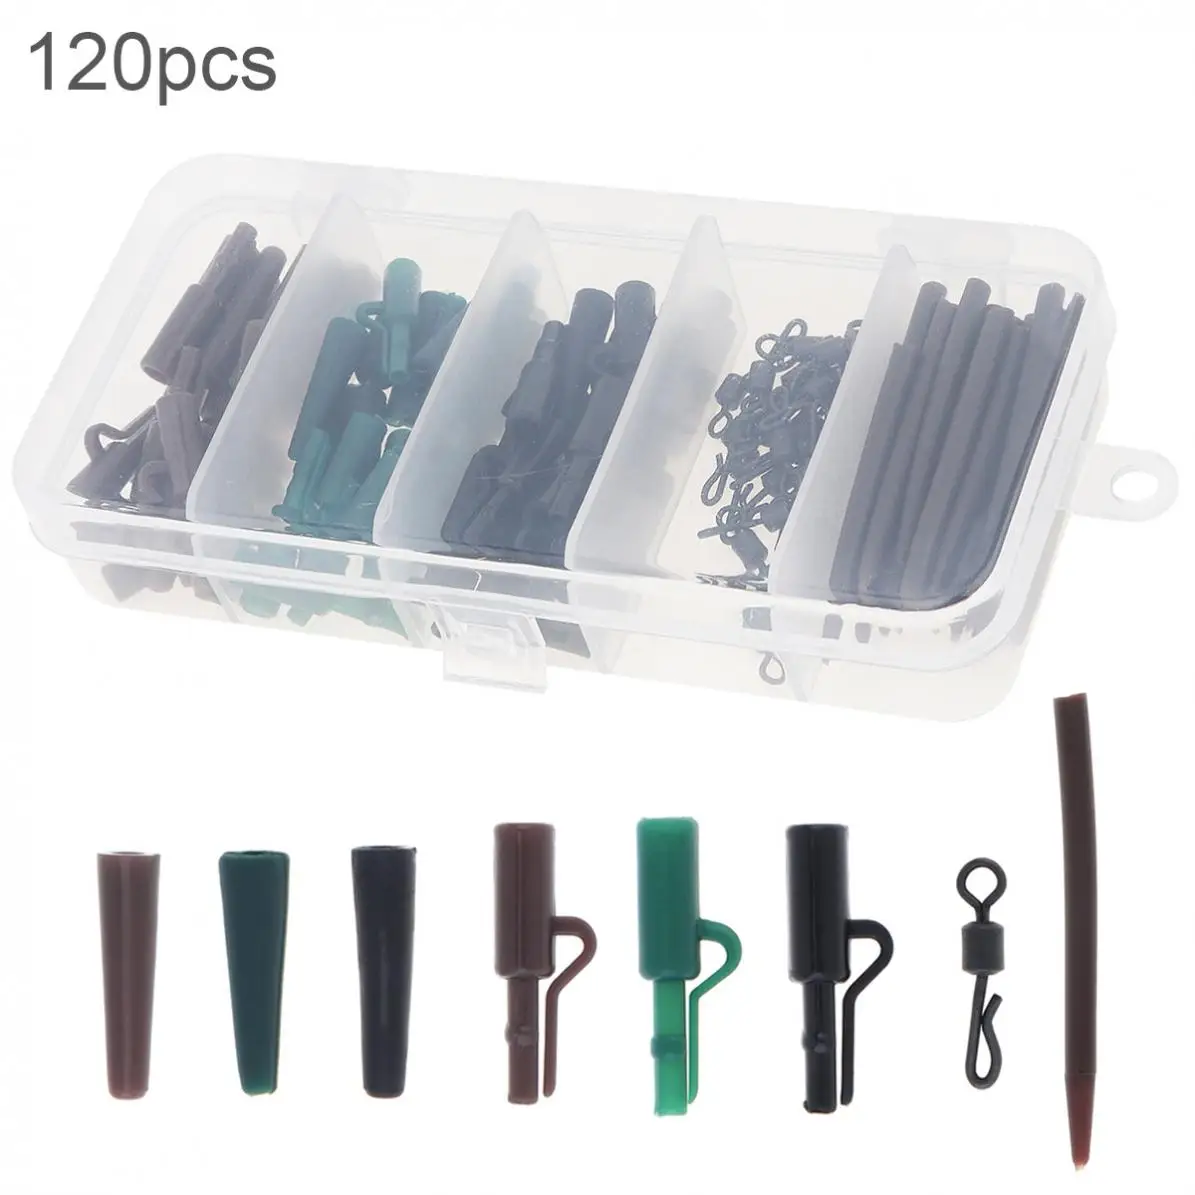 

120pcs Carp Fishing Accessory Kit Including Quick Change Swivels Anti-tangle Sleeves Lead Safety Clips with Fishing Tackle Box